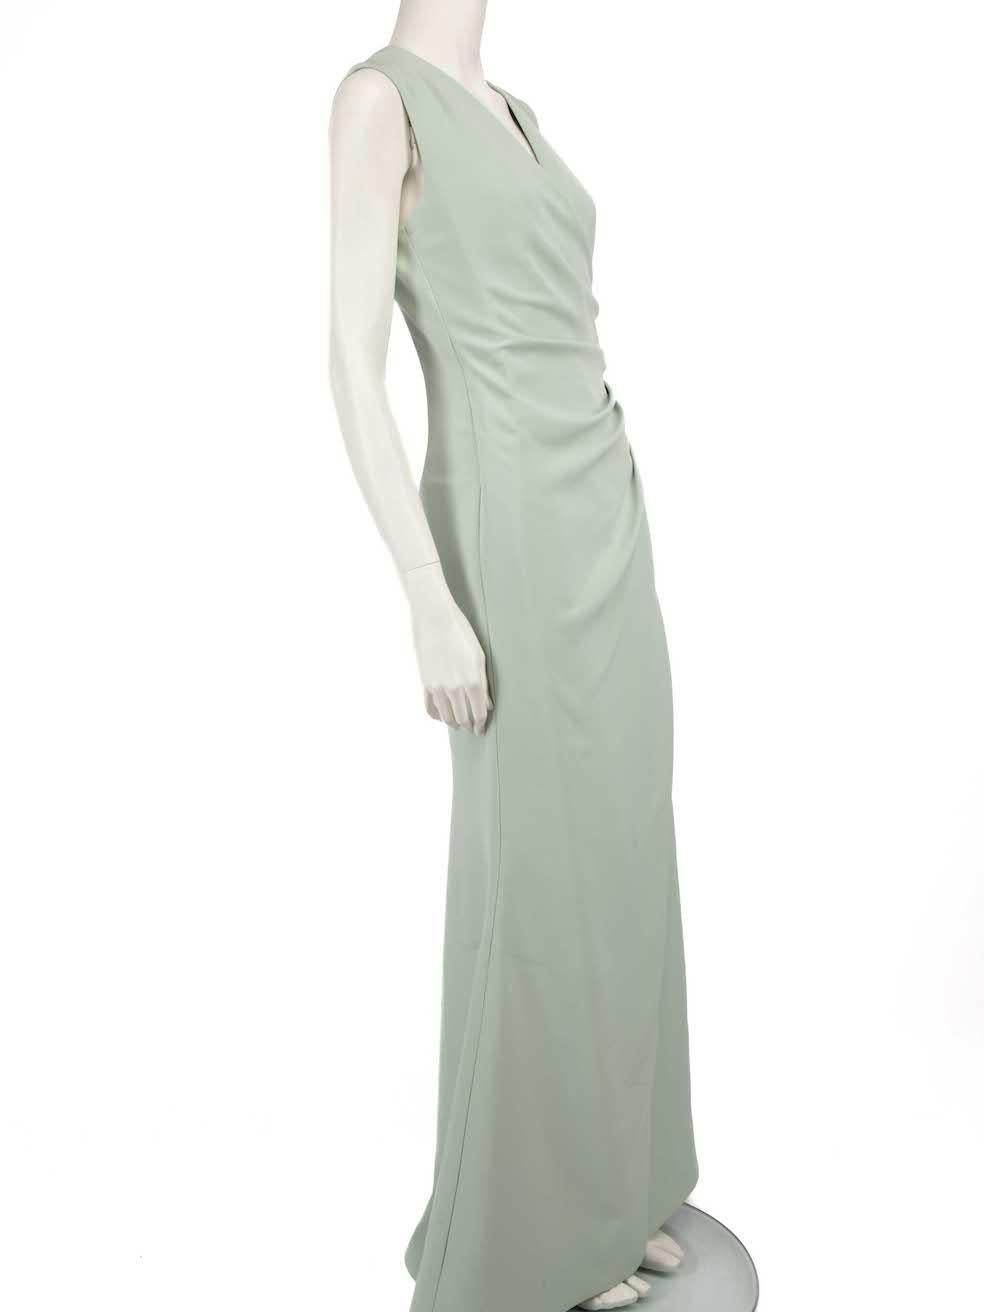 CONDITION is Very good. Minimal wear to dress is evident. Some small plucks to the weave and a mark at the front hem on this used Honayda designer resale item.
 
 
 
 Details
 
 
 Mint green
 
 Synthetic
 
 Gown
 
 Sleeveless
 
 Maxi
 
 Plunge neck
